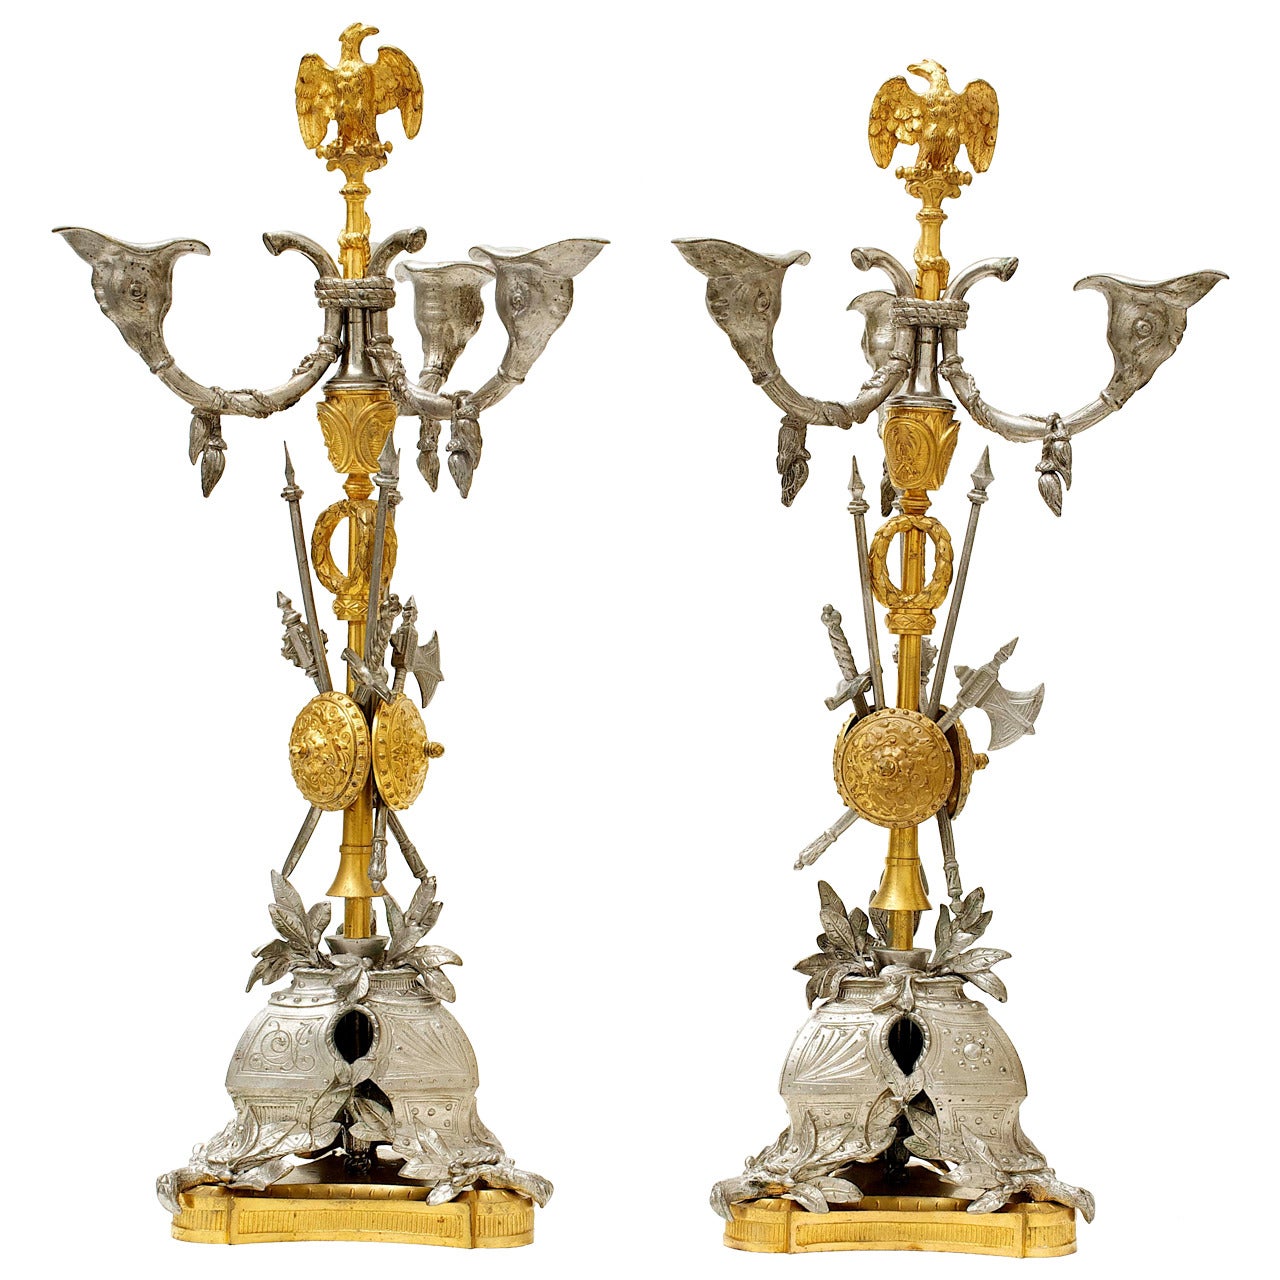 Candelabrum with Trophies 19th Century by N-G Gharpentier from J-F-T Gechter For Sale